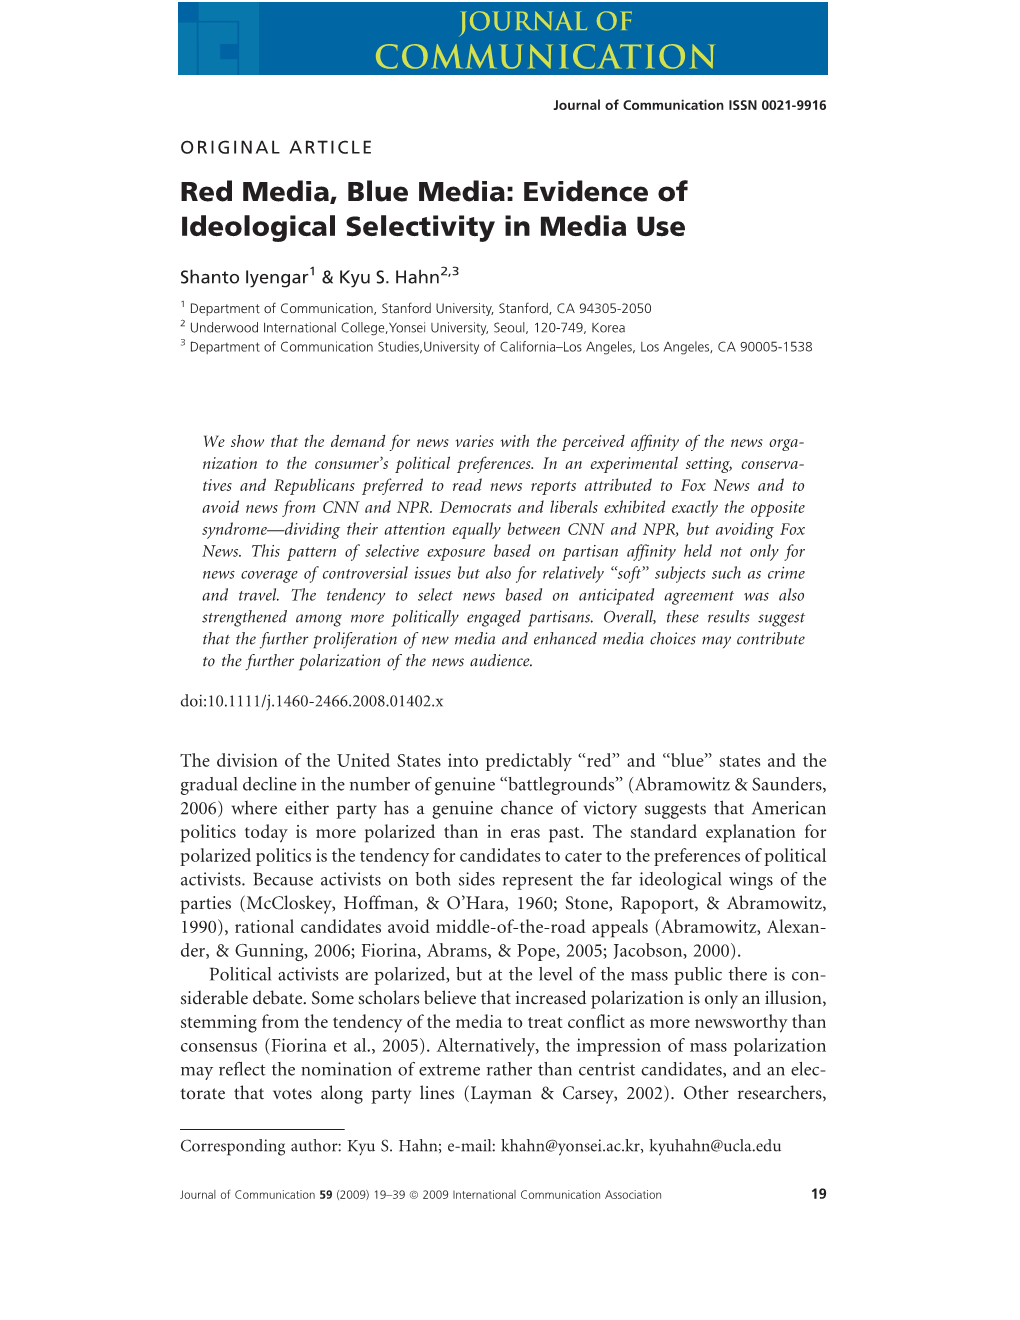 Red Media, Blue Media: Evidence of Ideological Selectivity in Media Use